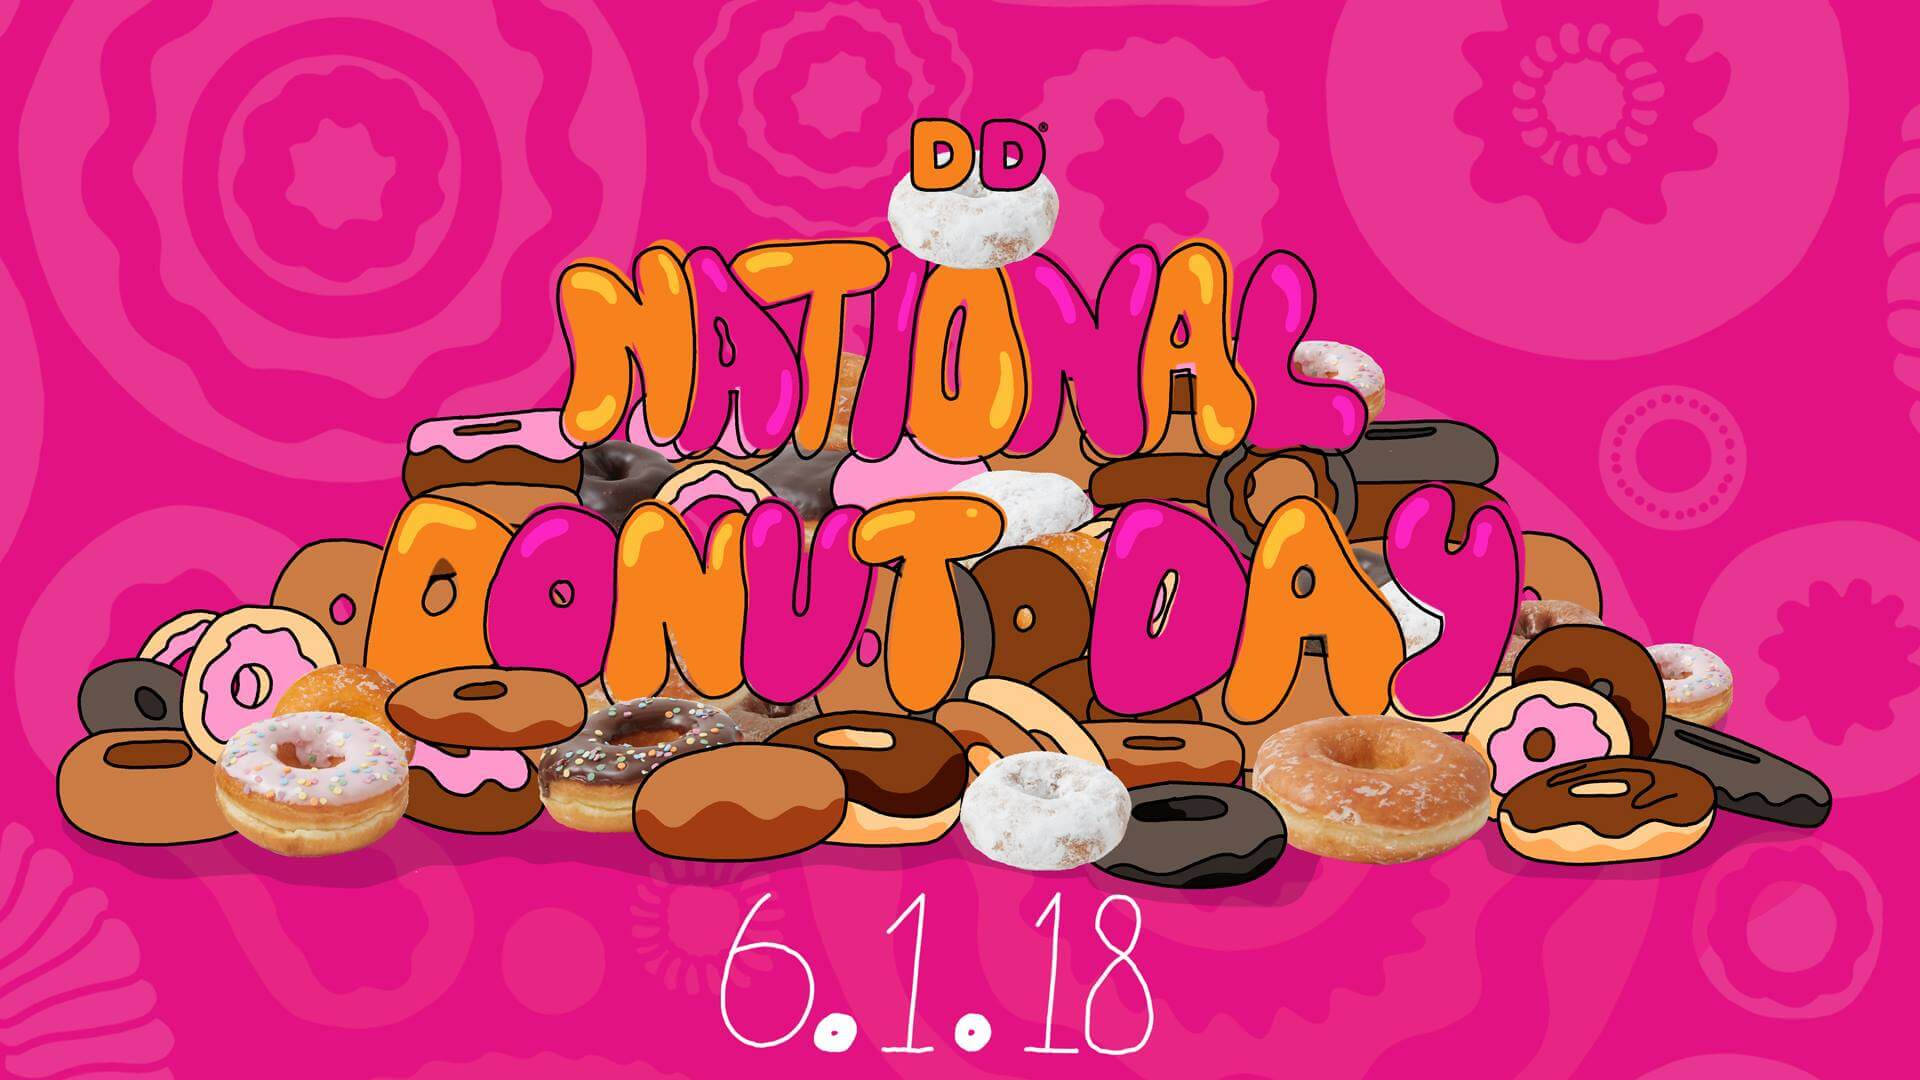 Dunkin Donuts National Donut Day 2018 Background